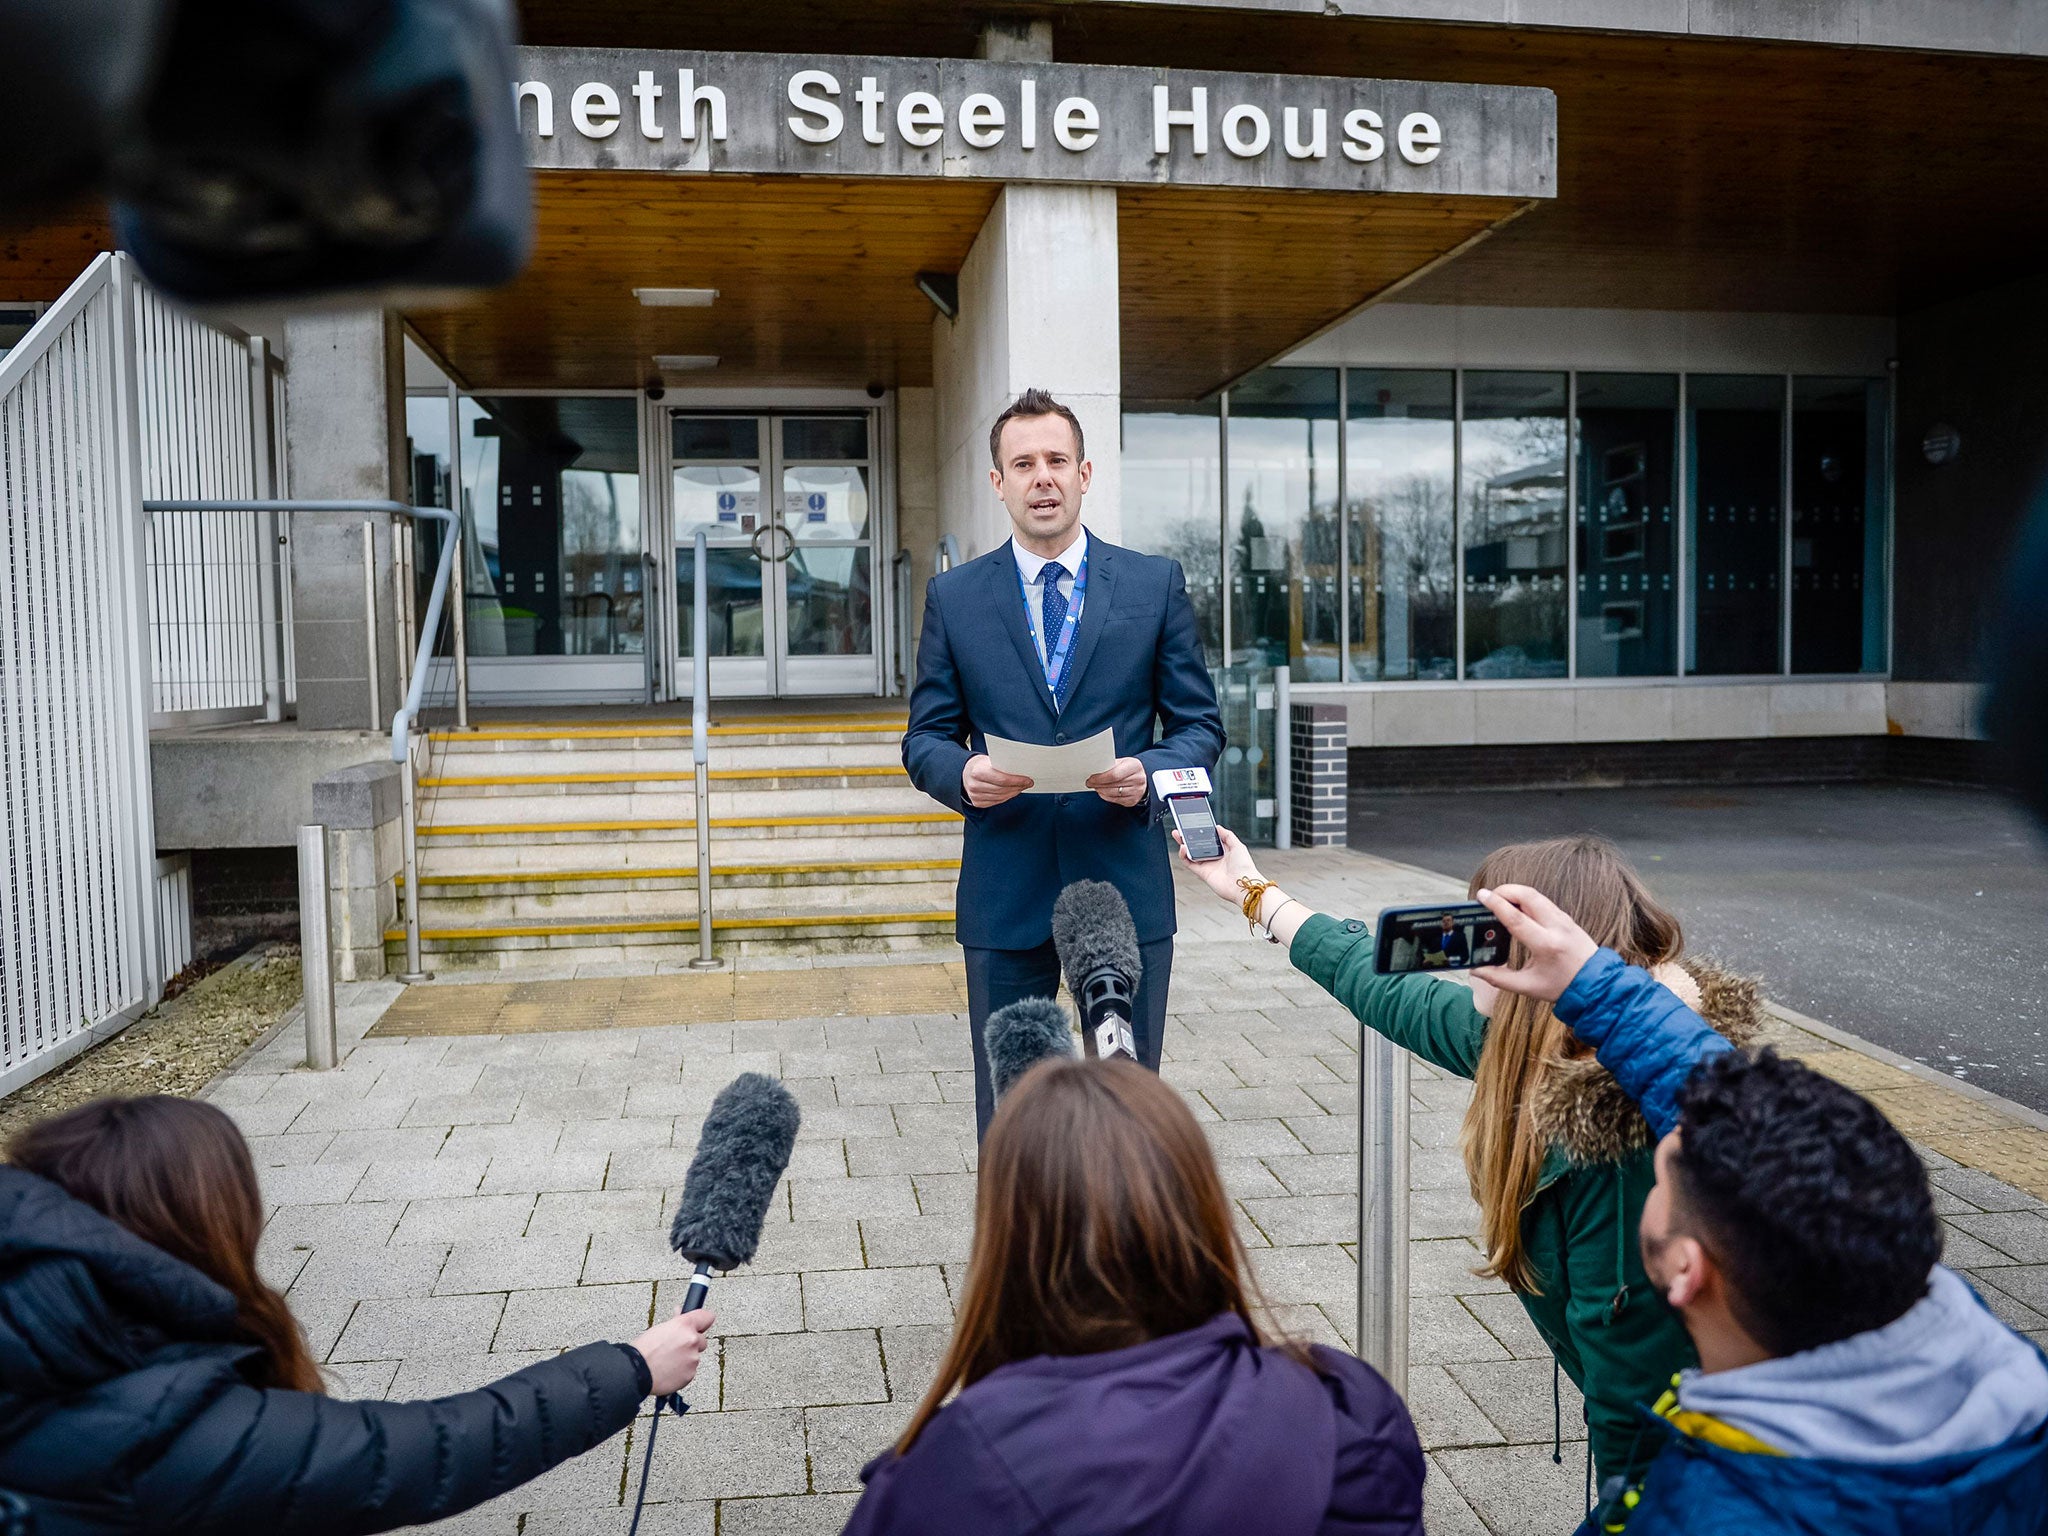 Detective Inspector Richard Pegler gives a statement to the press outside Kenneth Steele House, Bristol